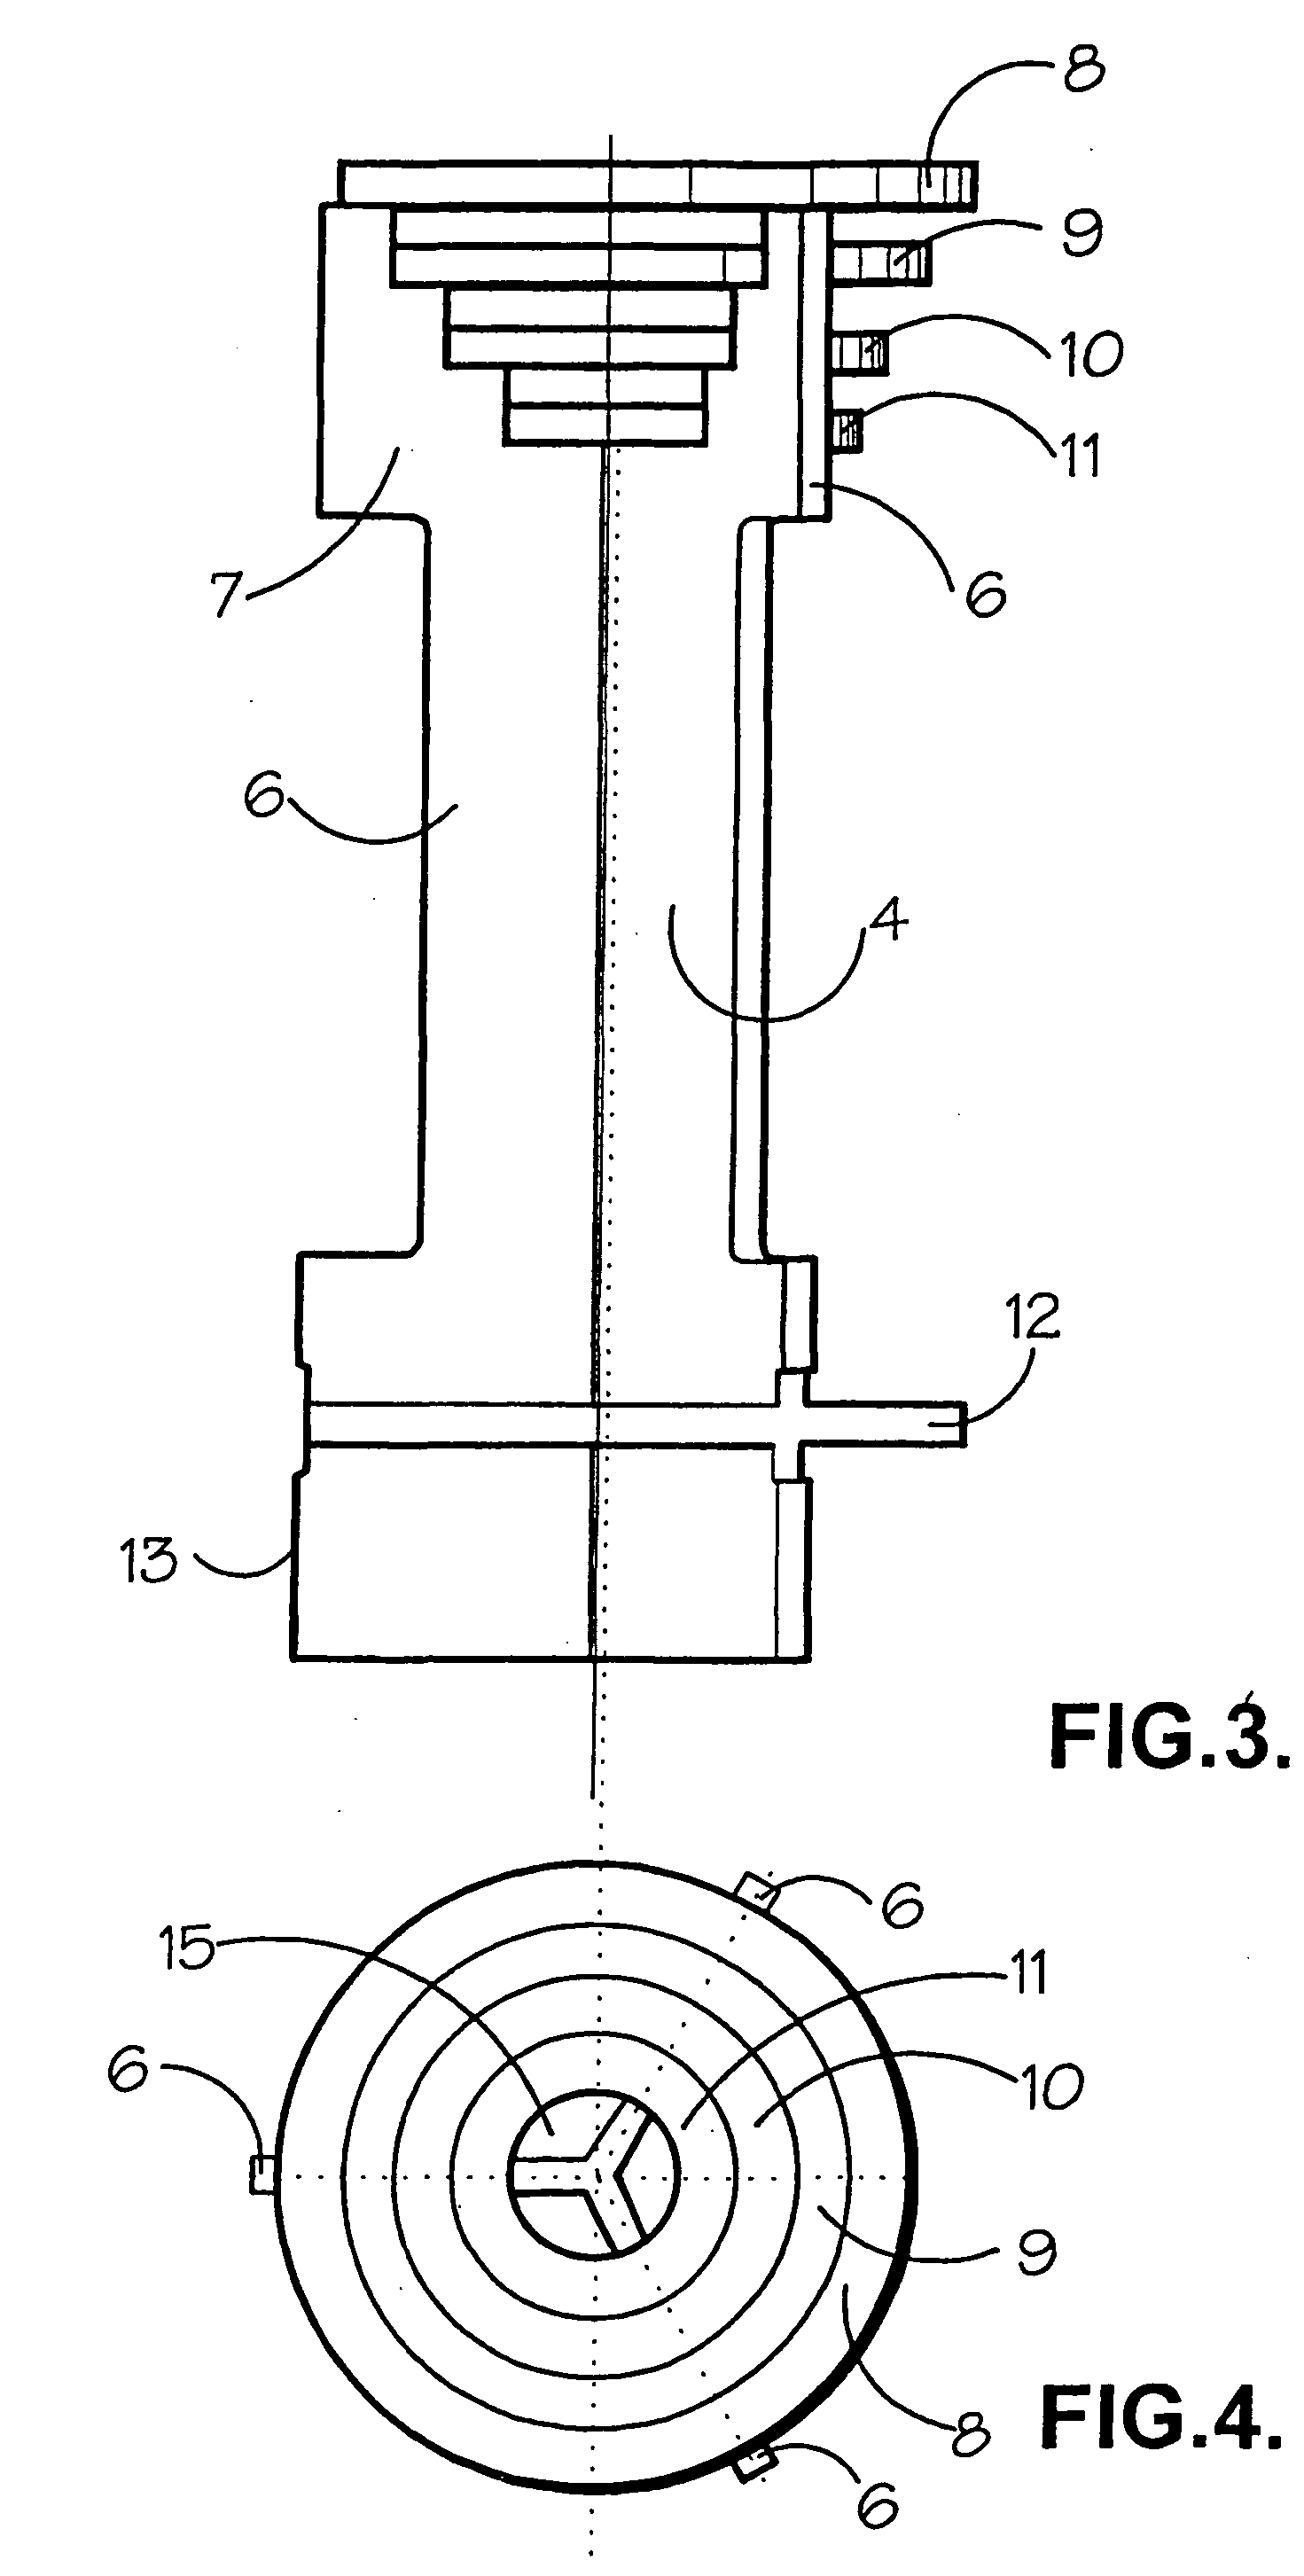 Process and apparatus for loading a particulate solid into a vertical tube